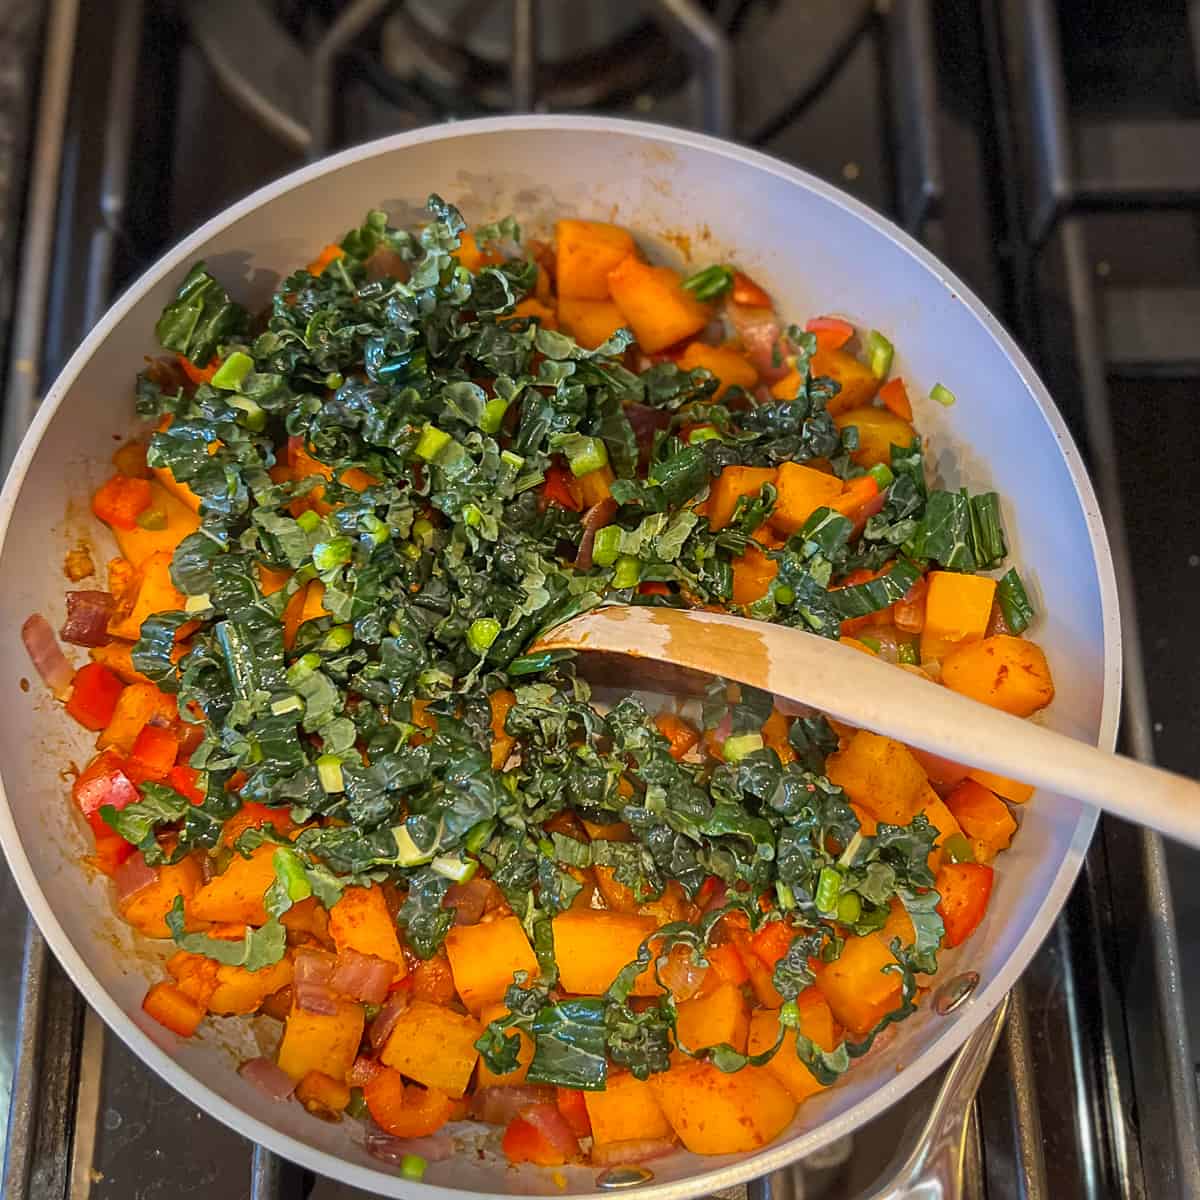 A wooden spoon stirring kale into the butternut squash hash in a pan on the stovetop.